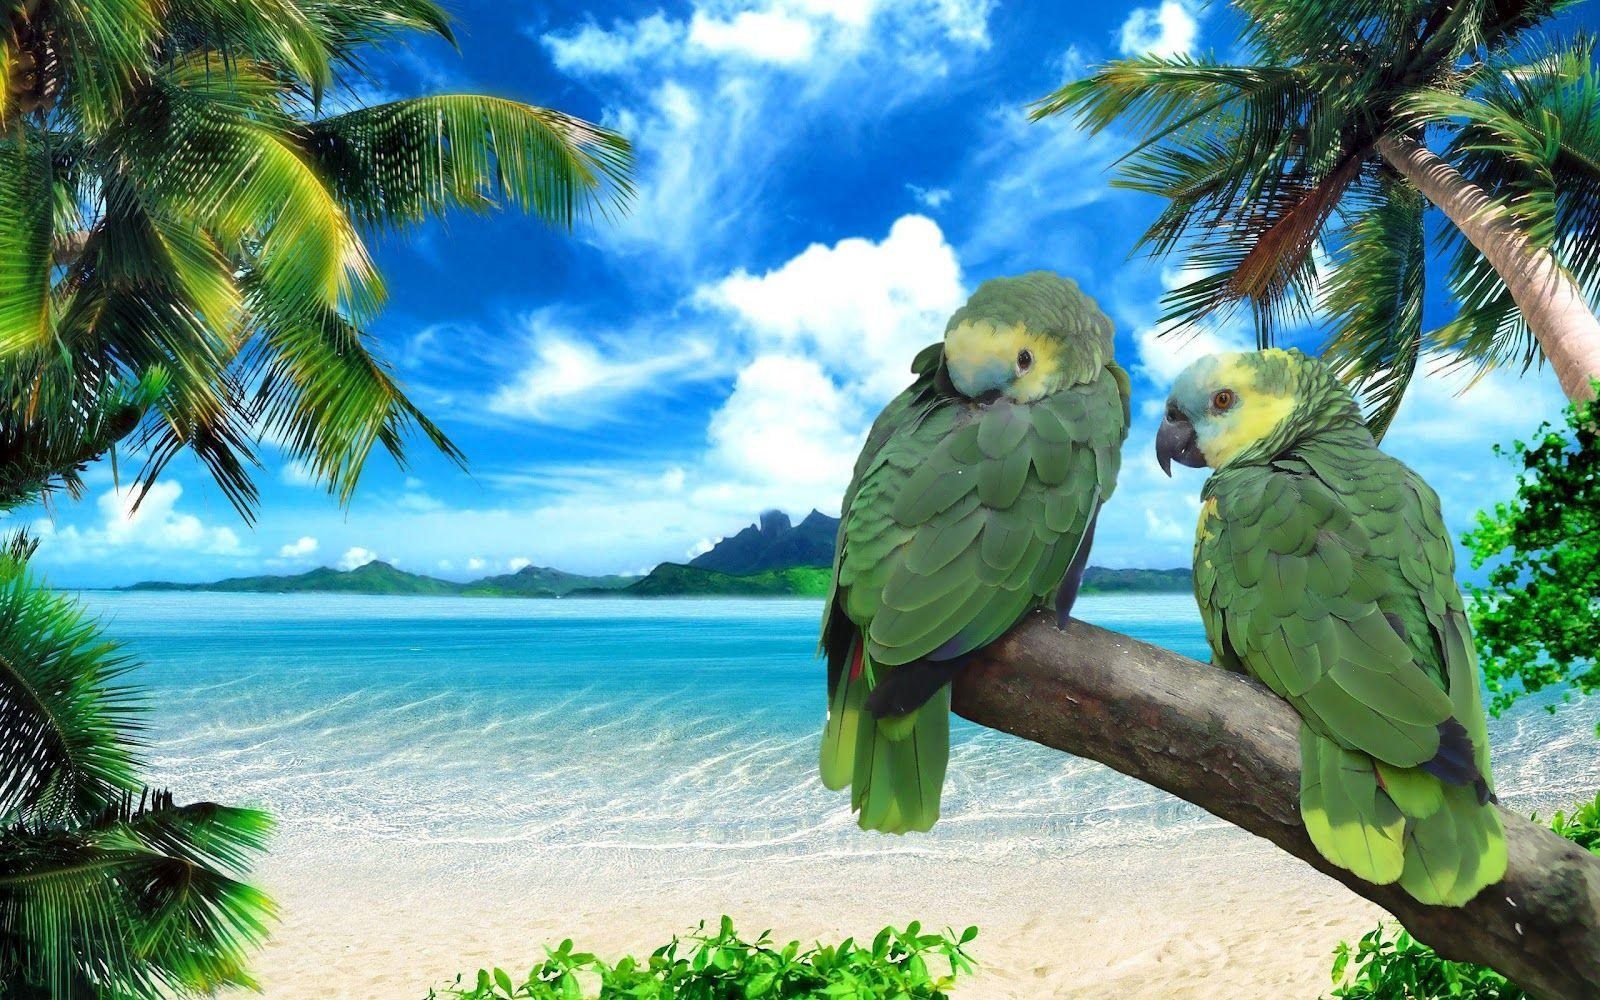 Parrot Background